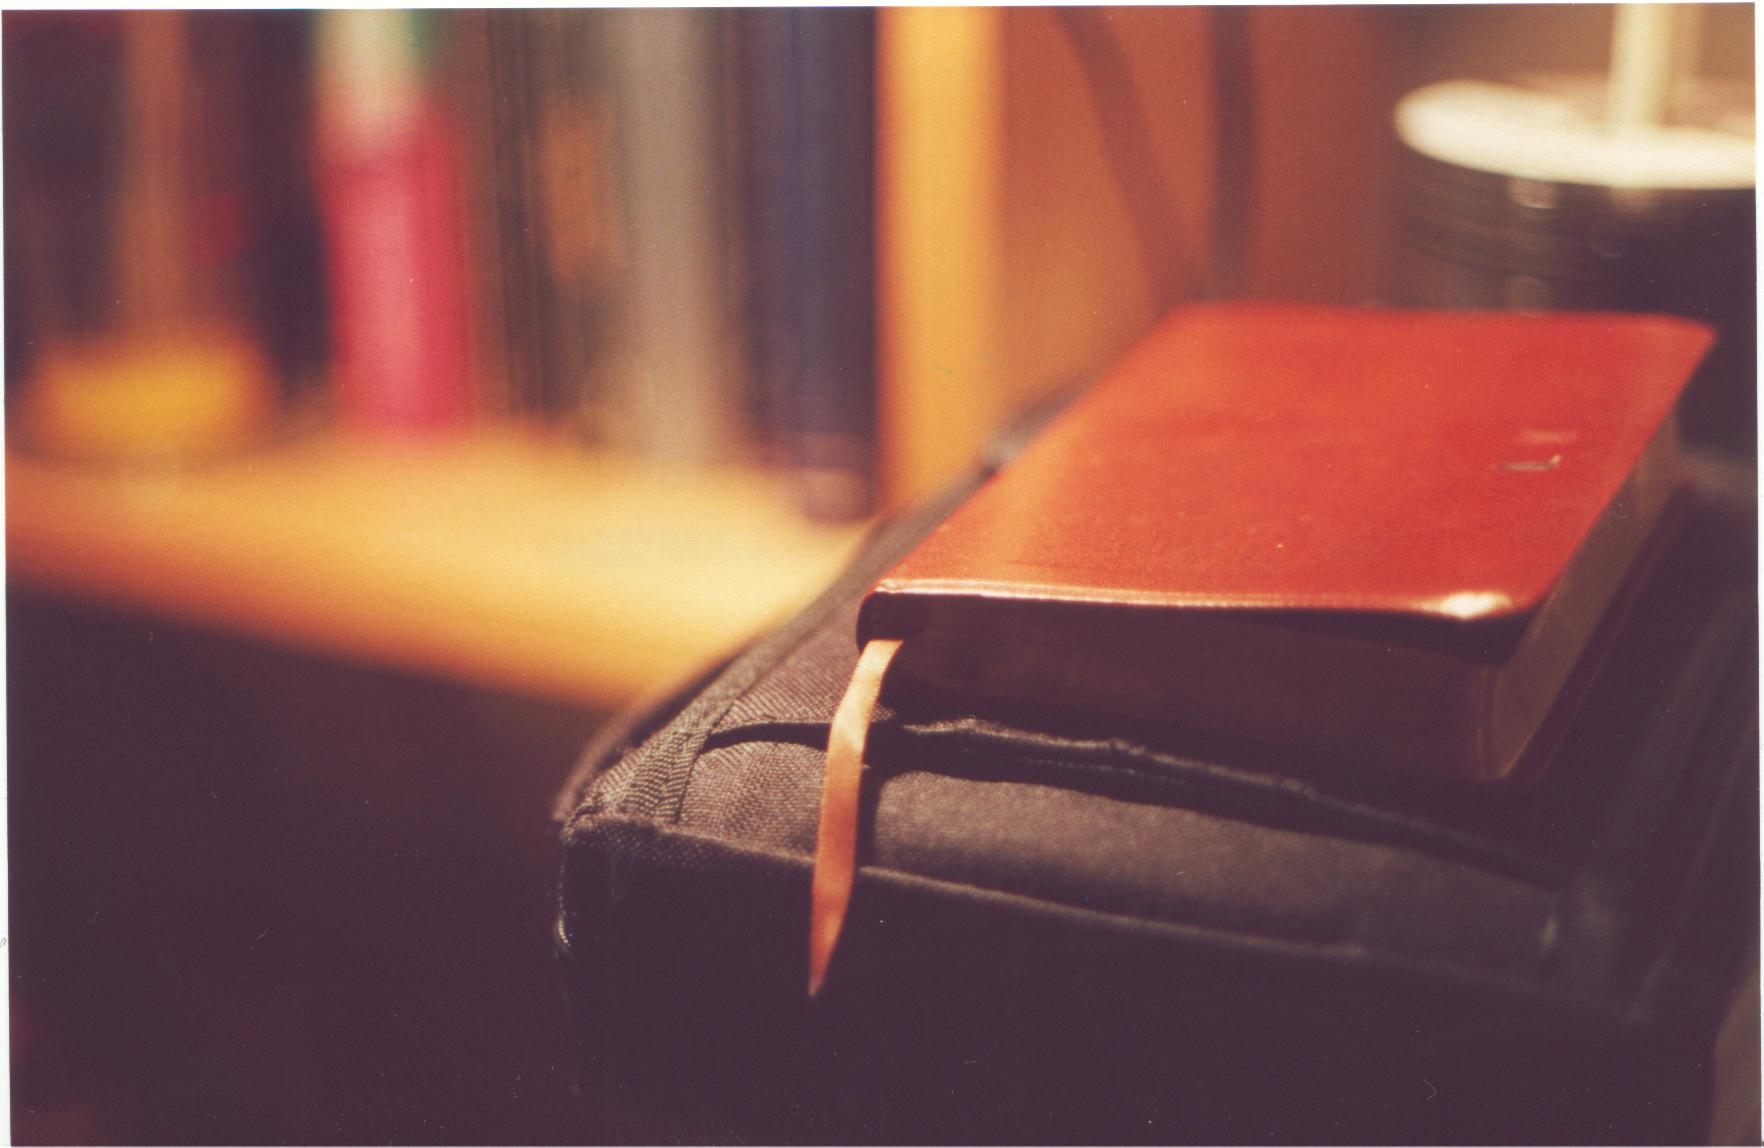 "Bible" by Dwight Stone, Flickr. Used according to Creative Commons license.